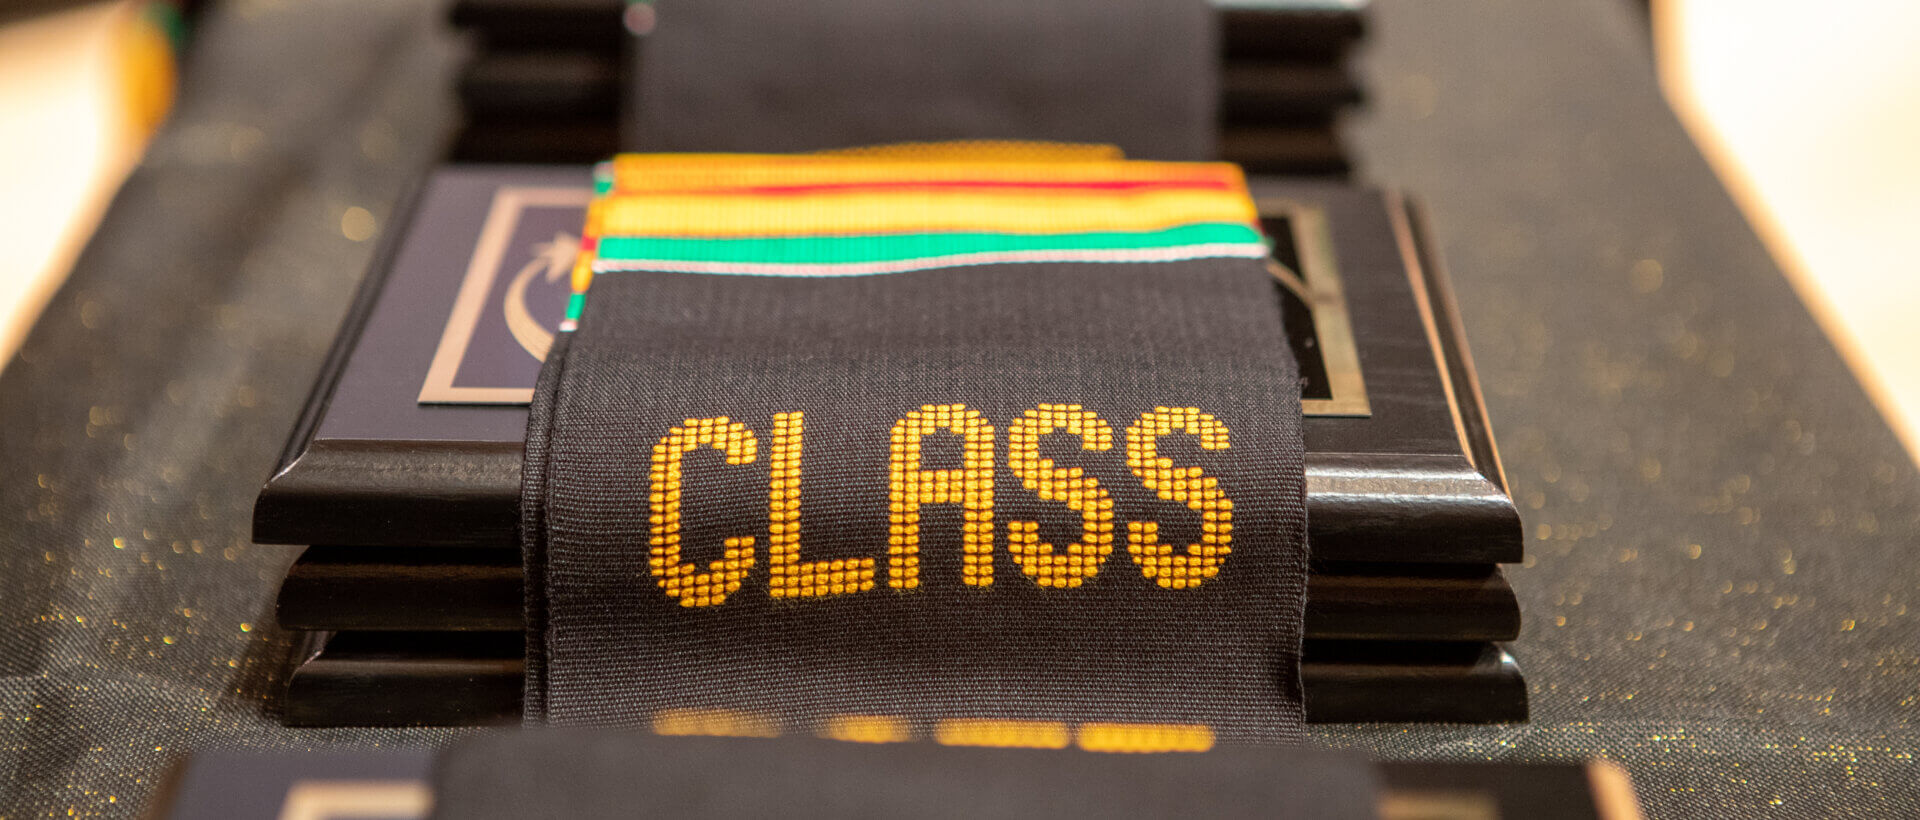 An image of Kente stoles for the Black graduates